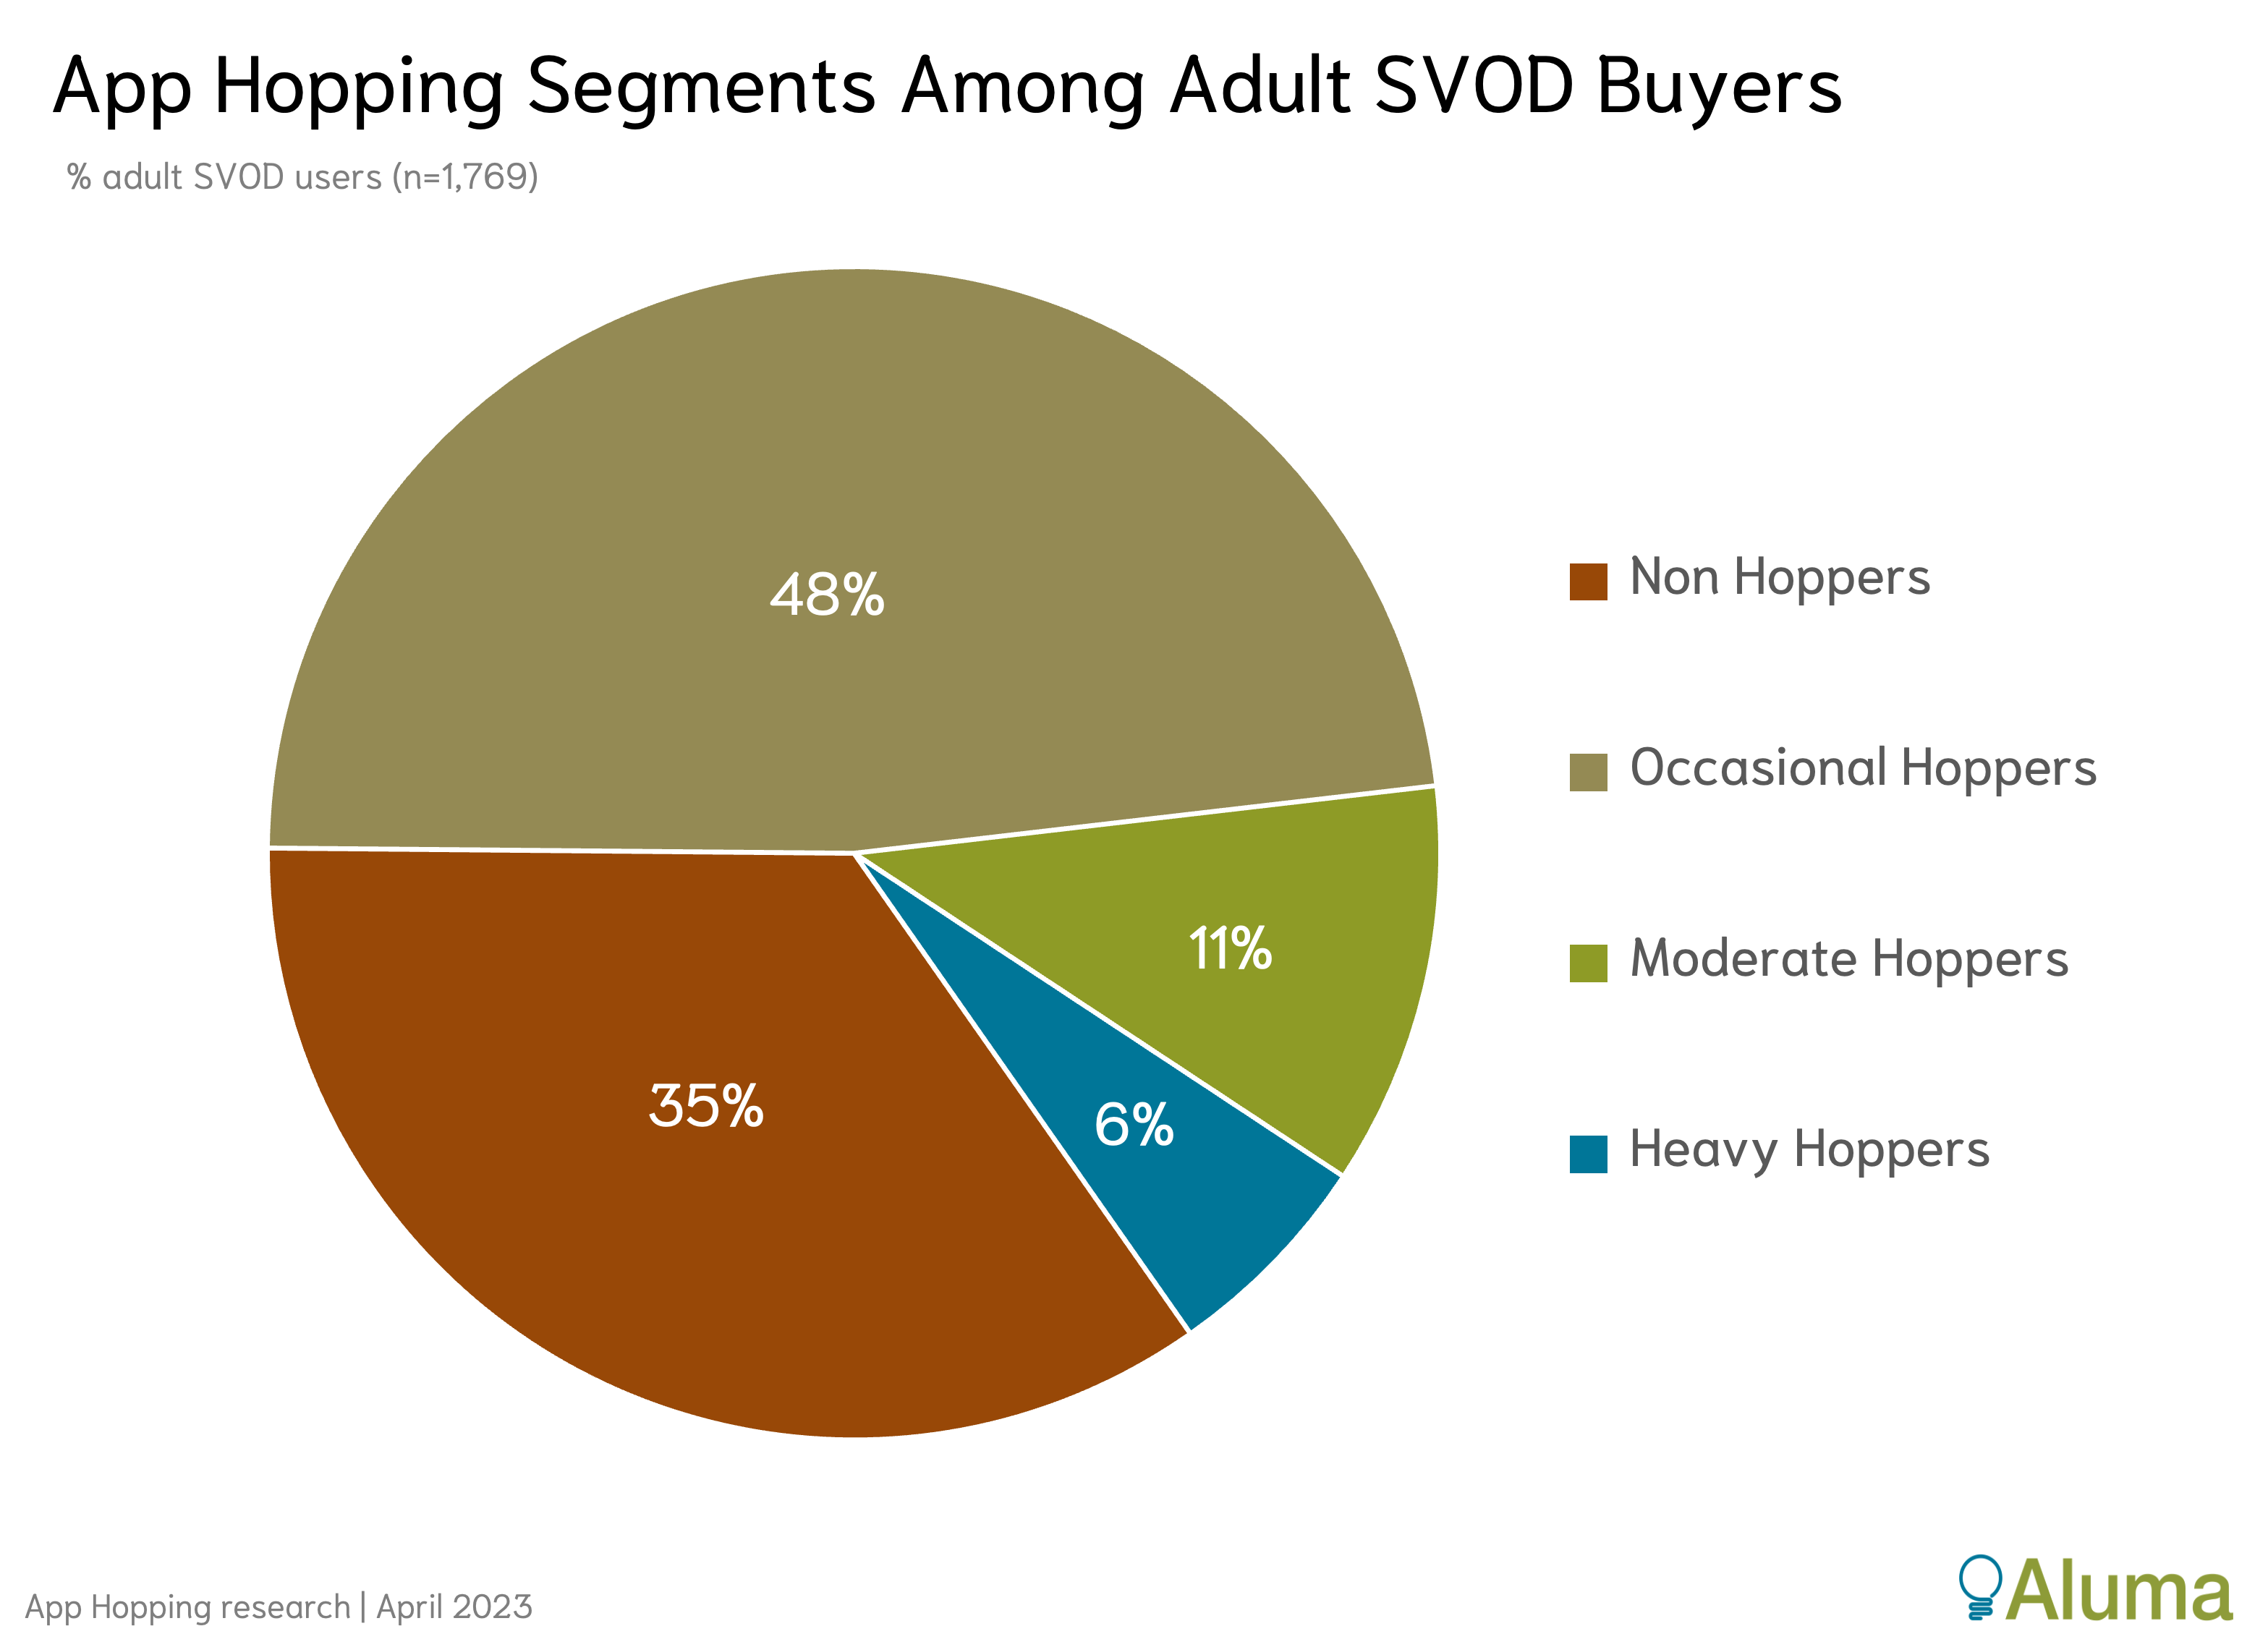 One in Six Adult SVOD Buyers Regularly Engage in App Hopping